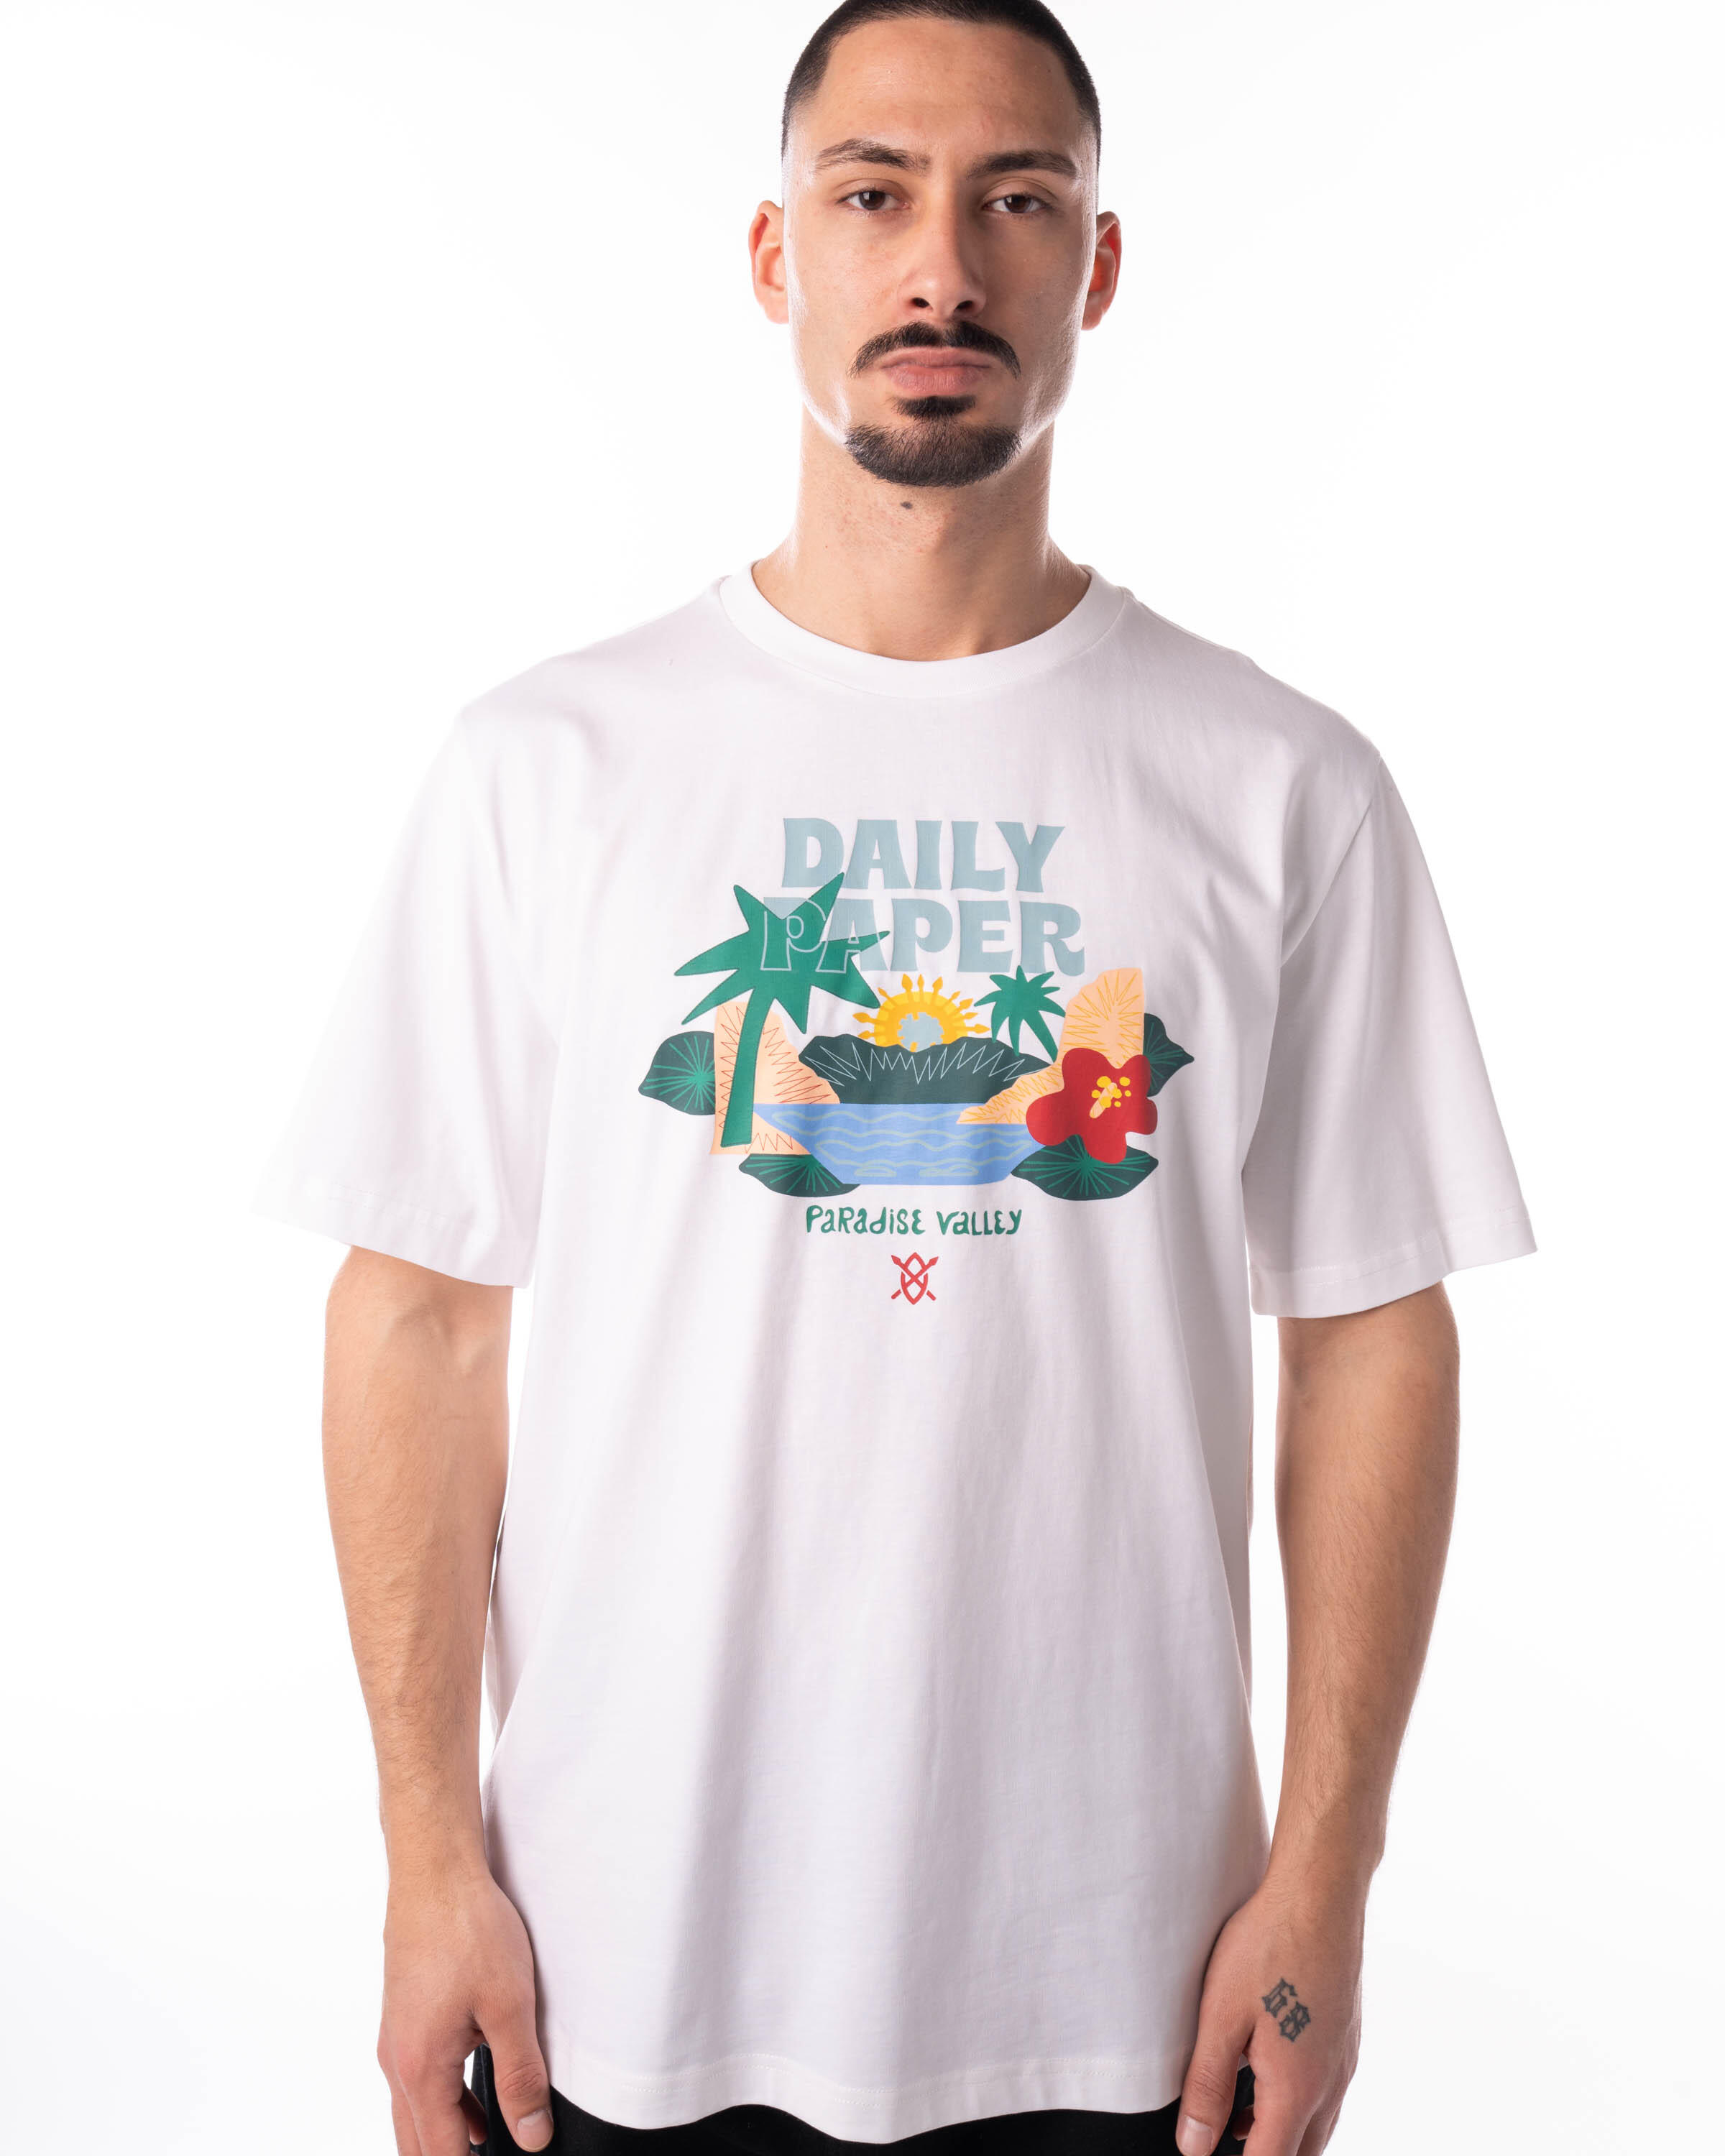 Daily Paper remy ss t-shirt